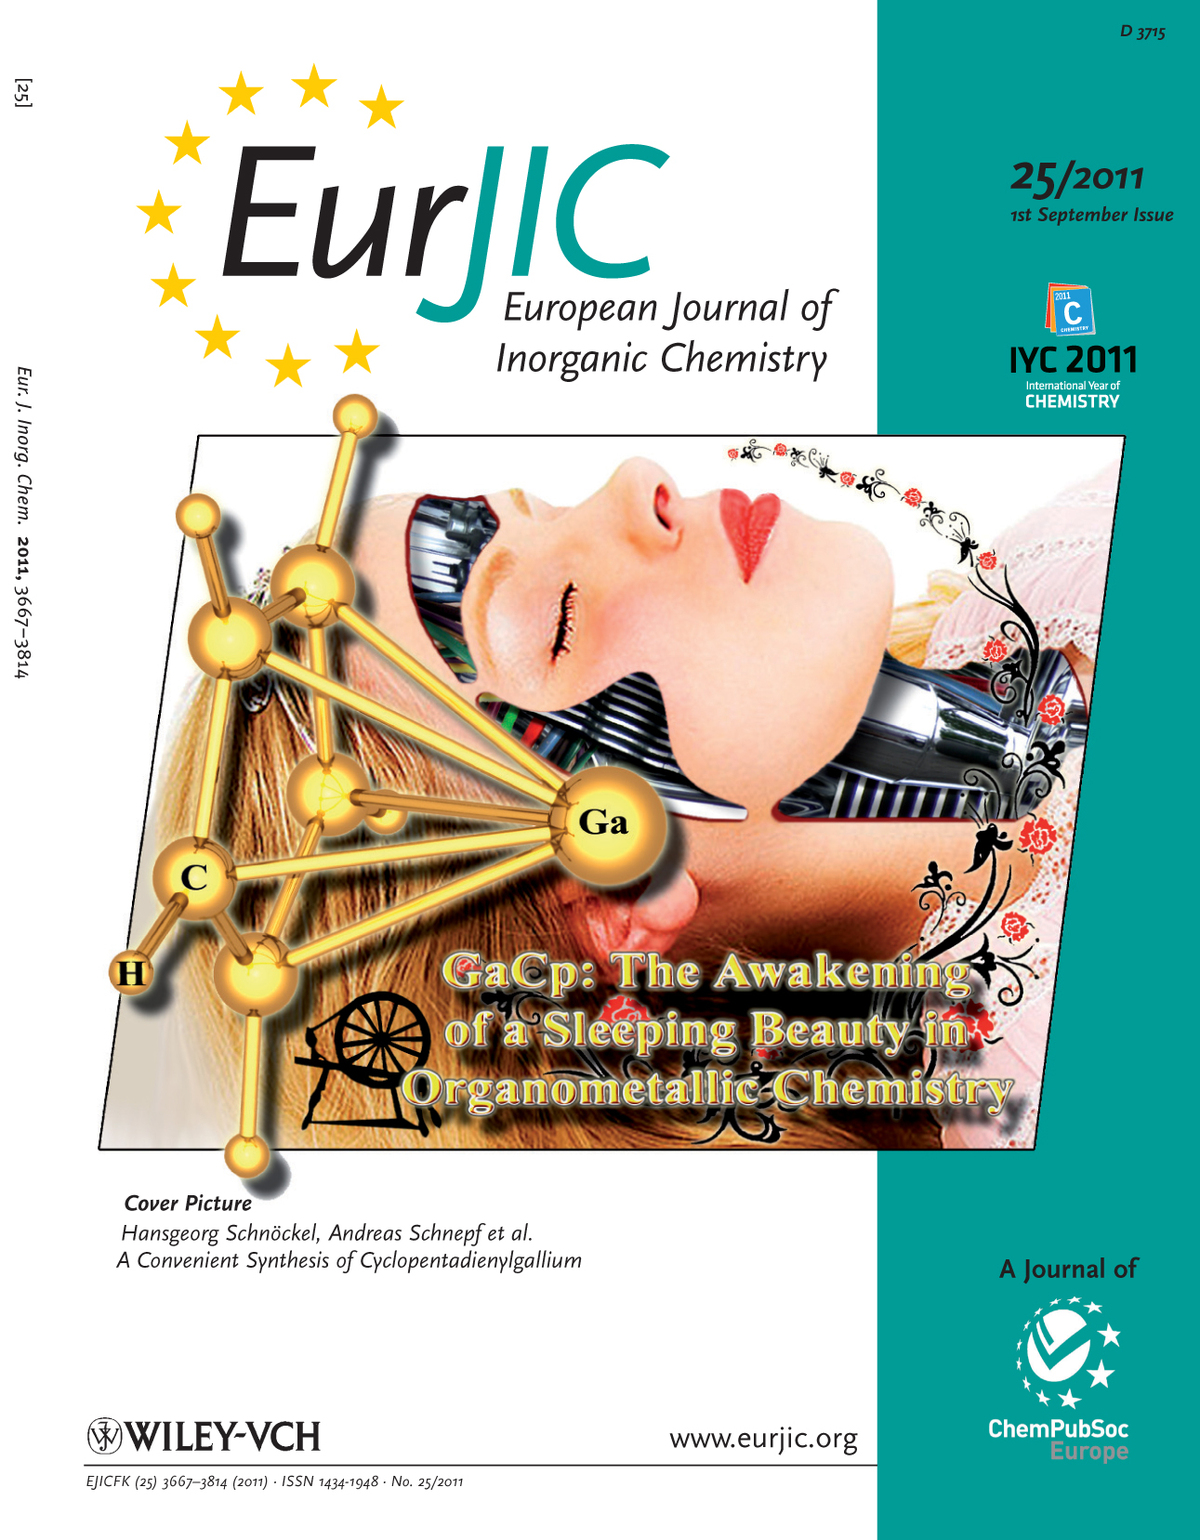 Cover Picture European Journal of Inorganic Chemistry 2011